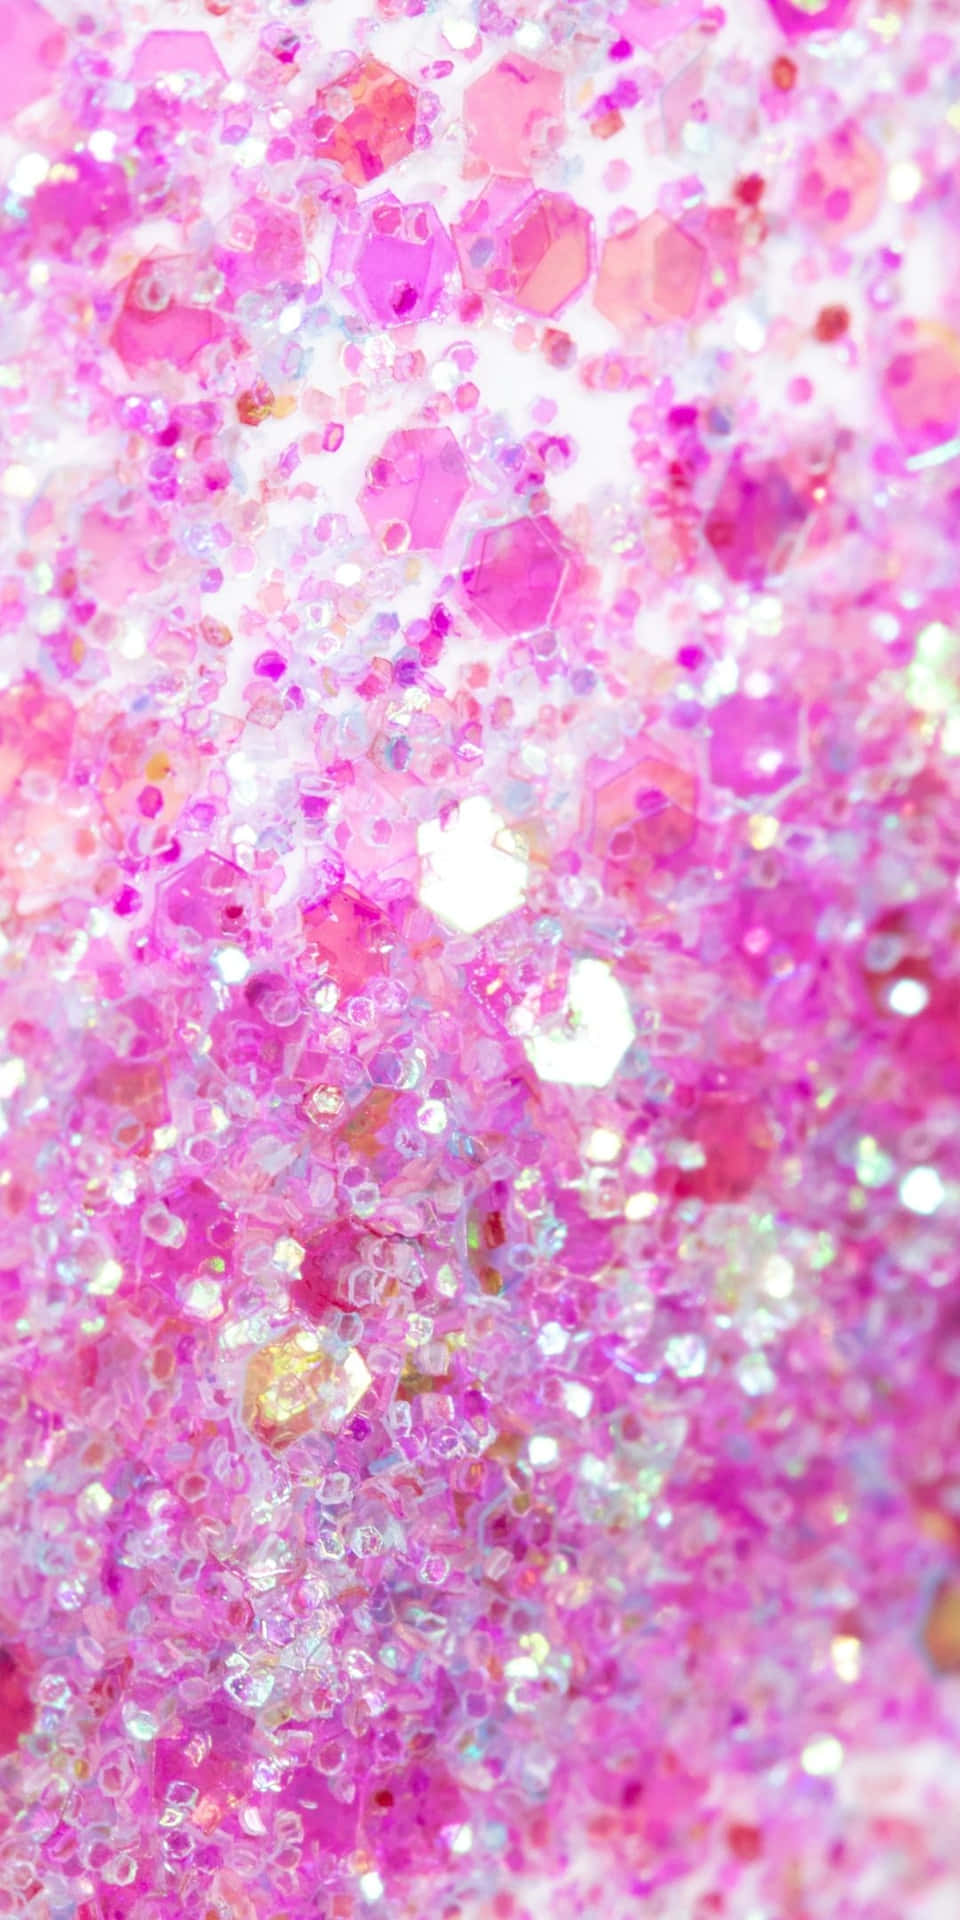 Download Sparkly Pink Background | Wallpapers.com